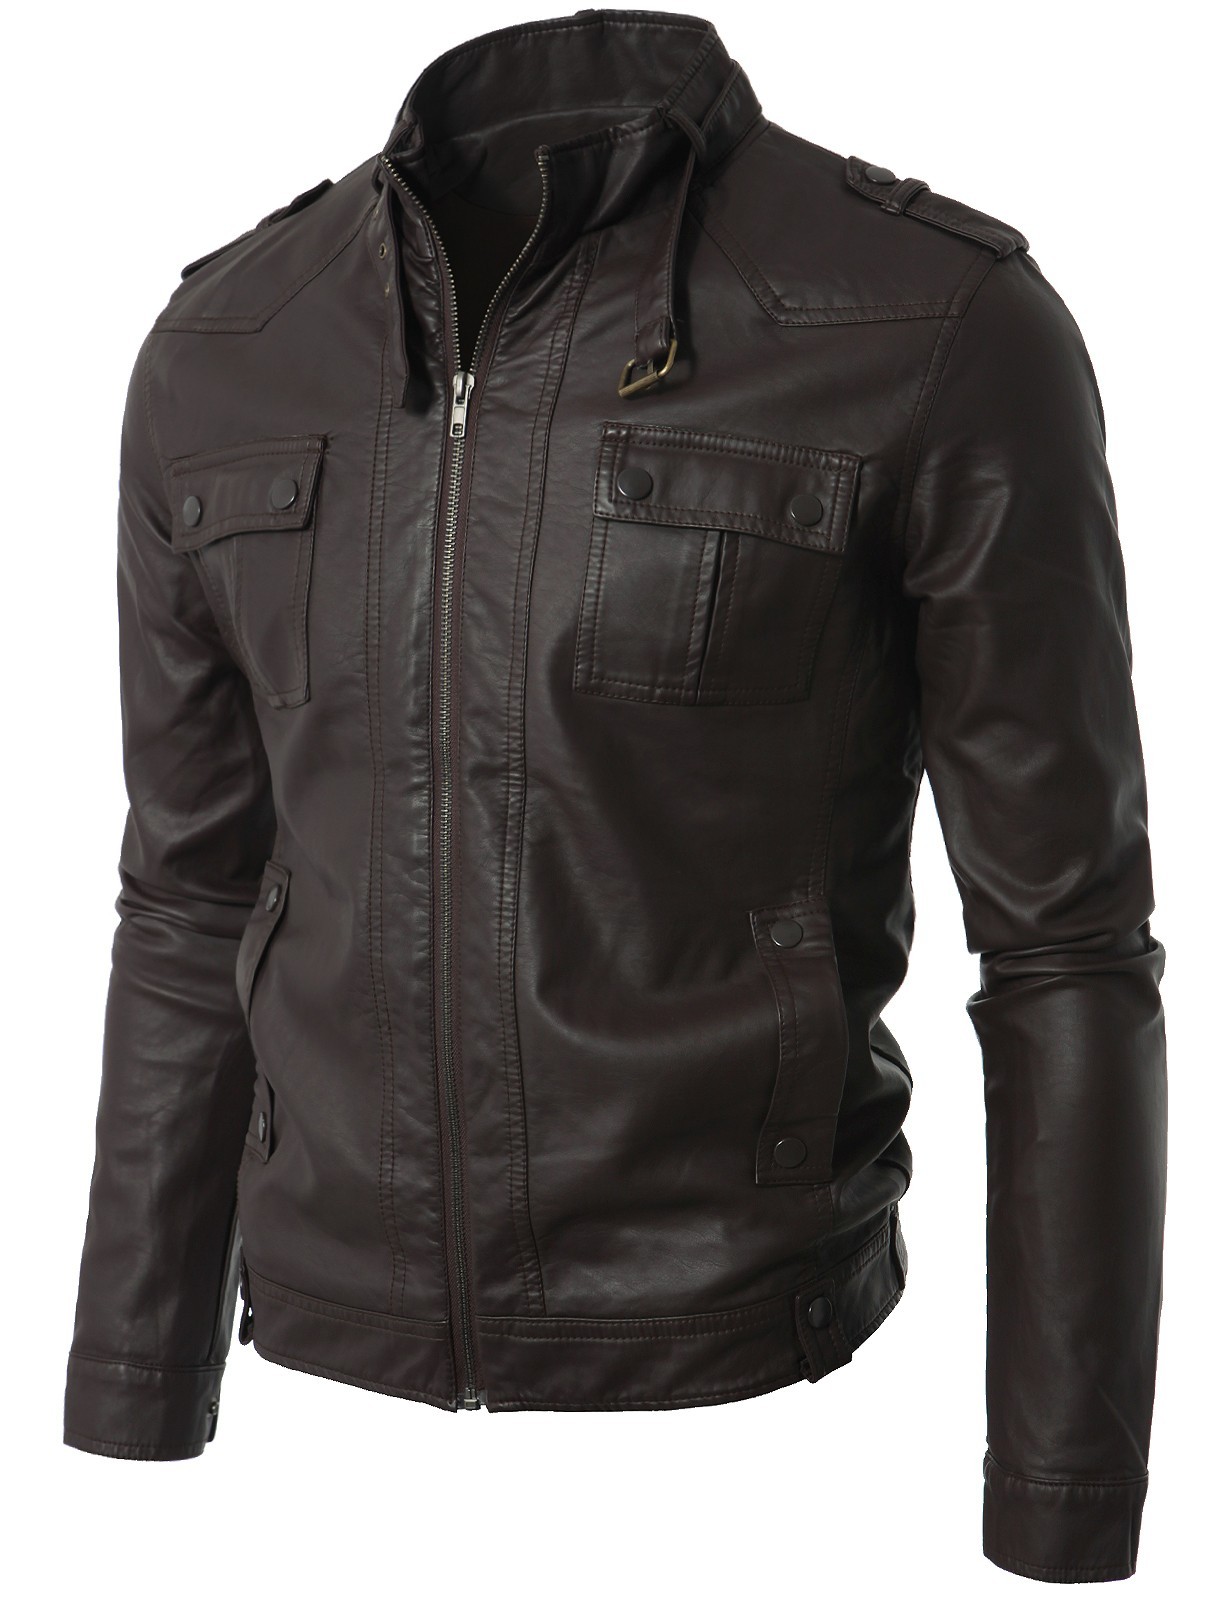 MENS CASUAL BUCKLE COLLAR LEATHER JACKET, MEN LEATHER JACKETS - Outerwear